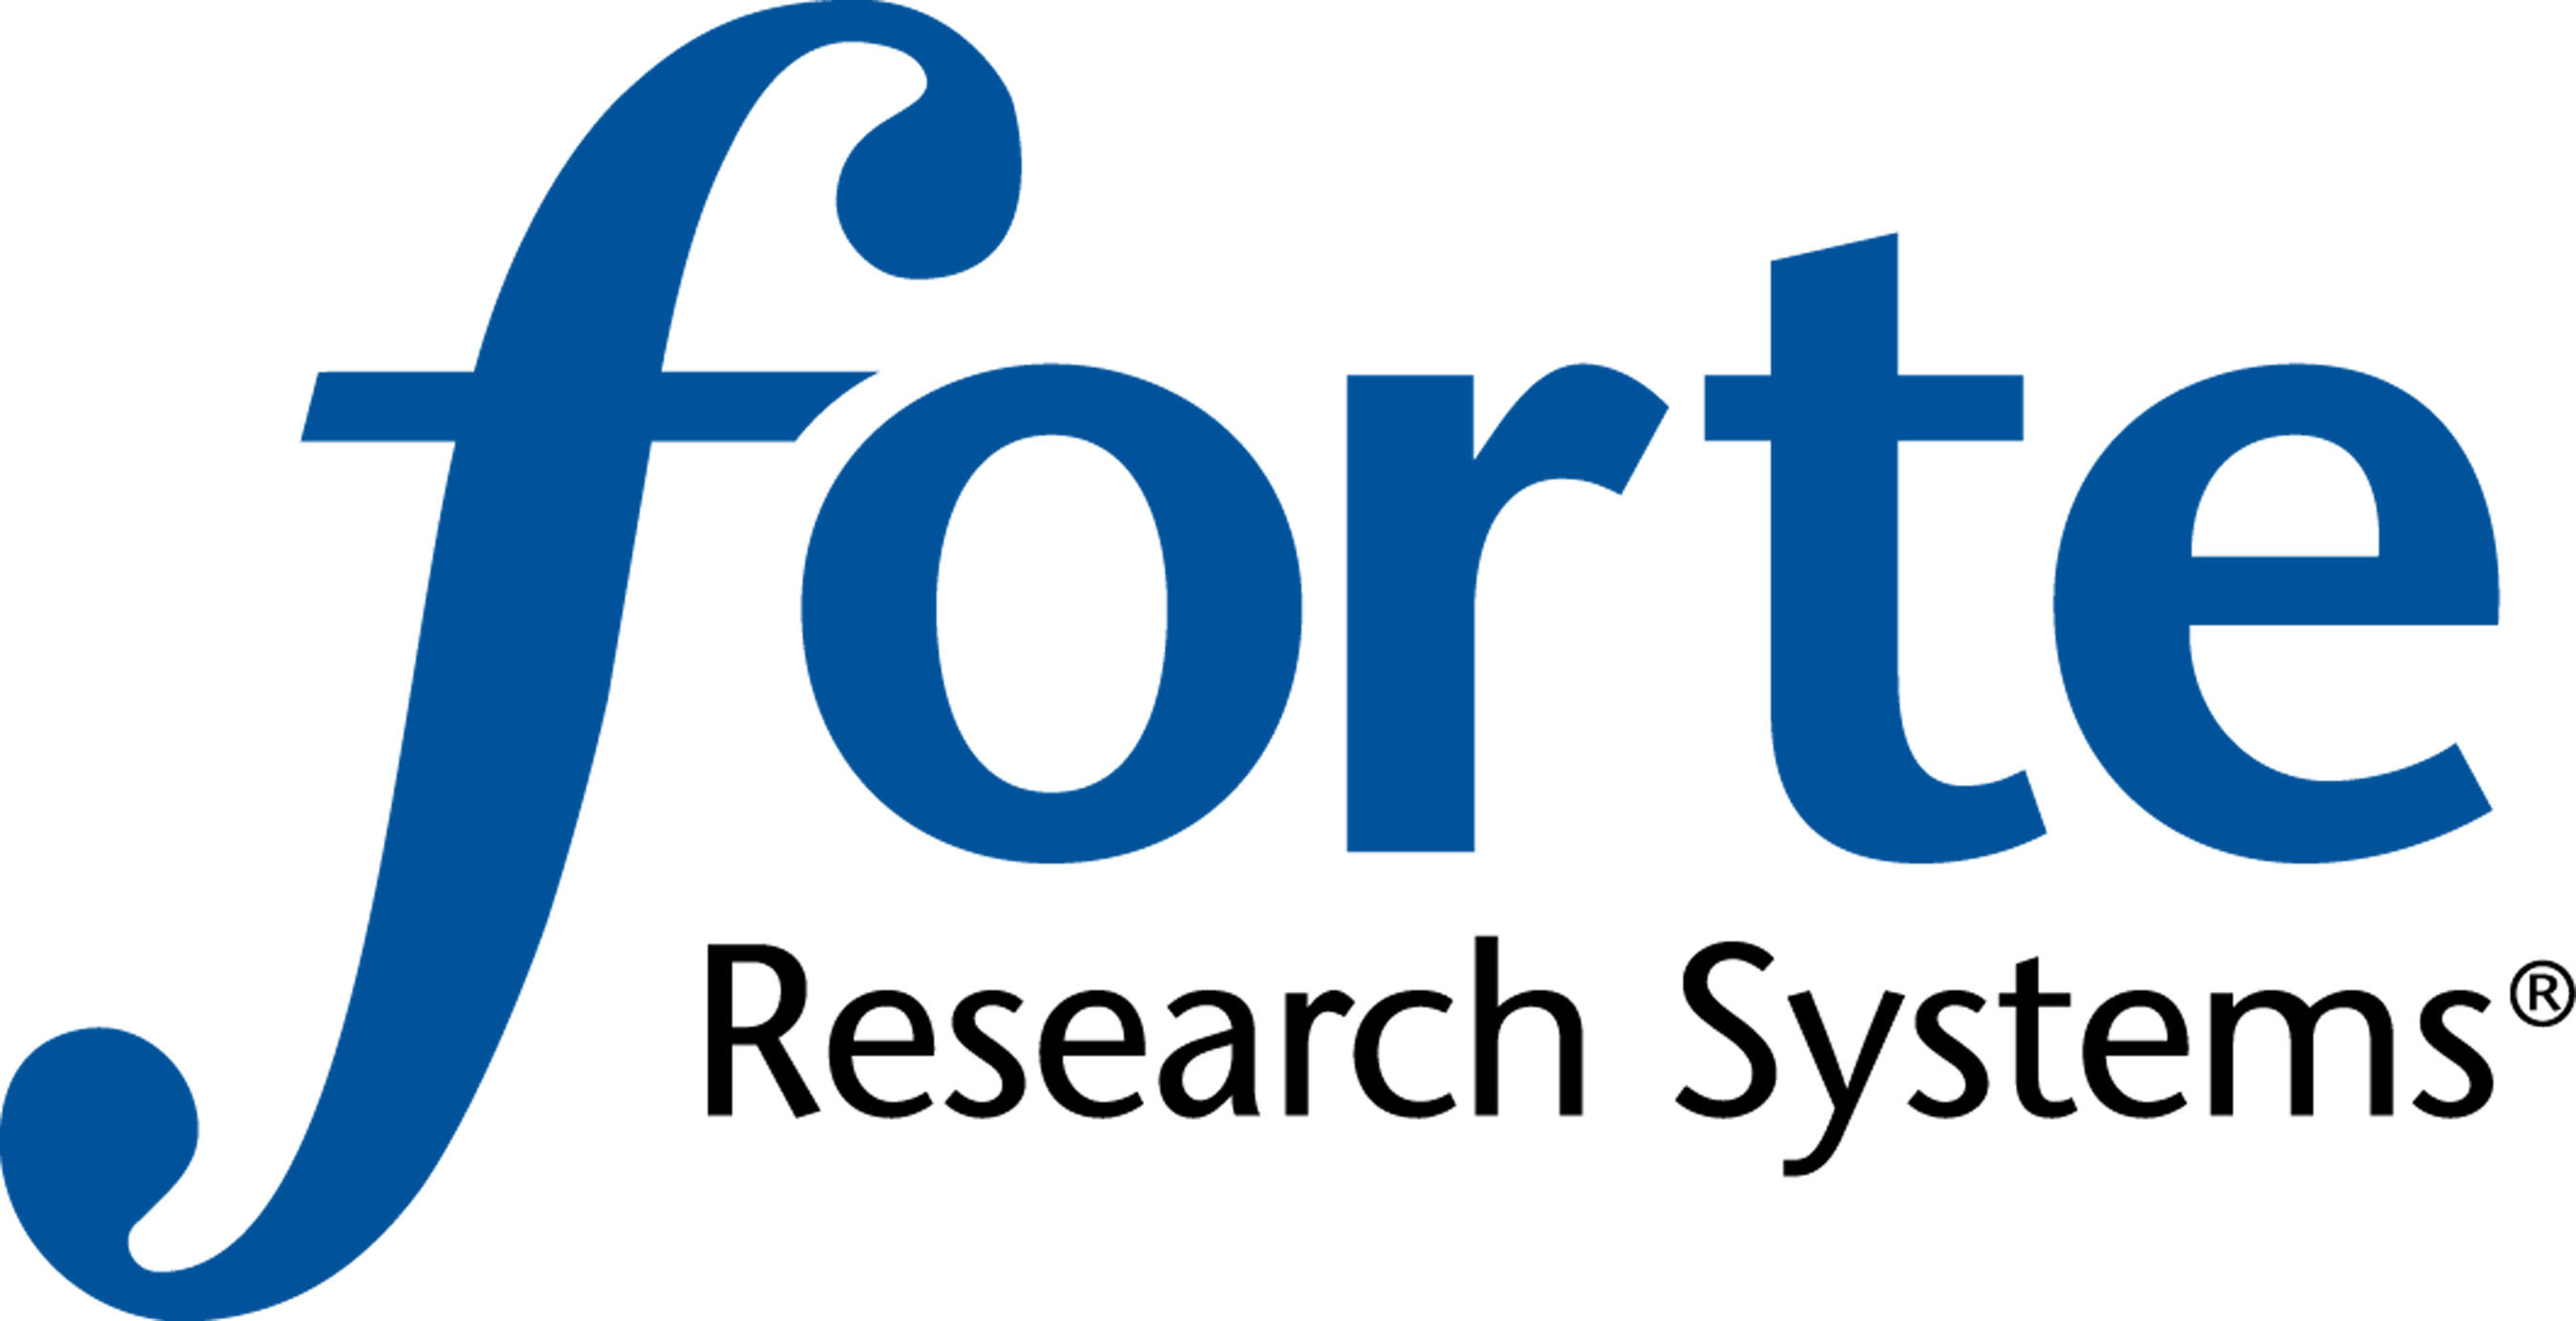 Forte Research Systems logo.